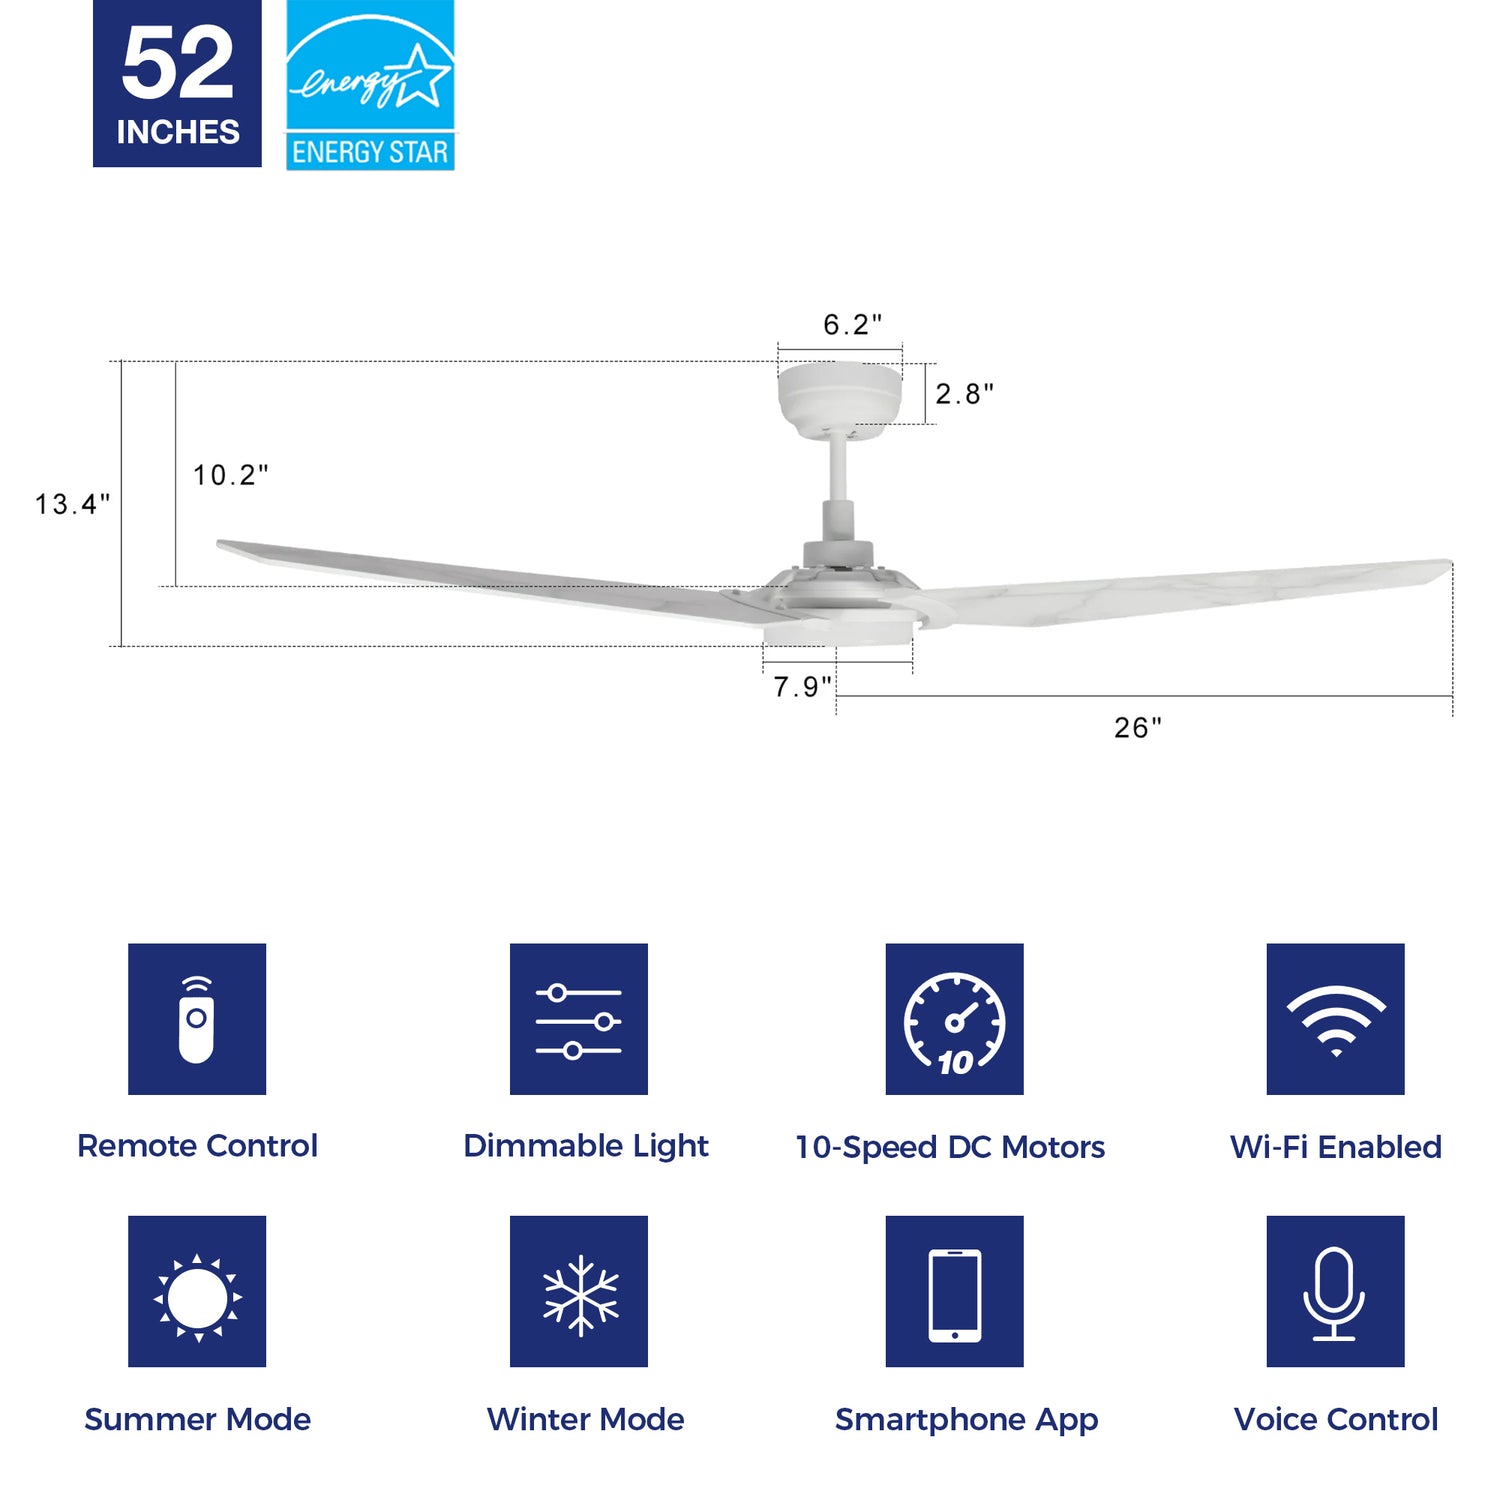 Trailblazer Outdoor 52&quot; Smart Ceiling Fan with LED Light Kit-White Base and White Marble Pattern fan blades. 